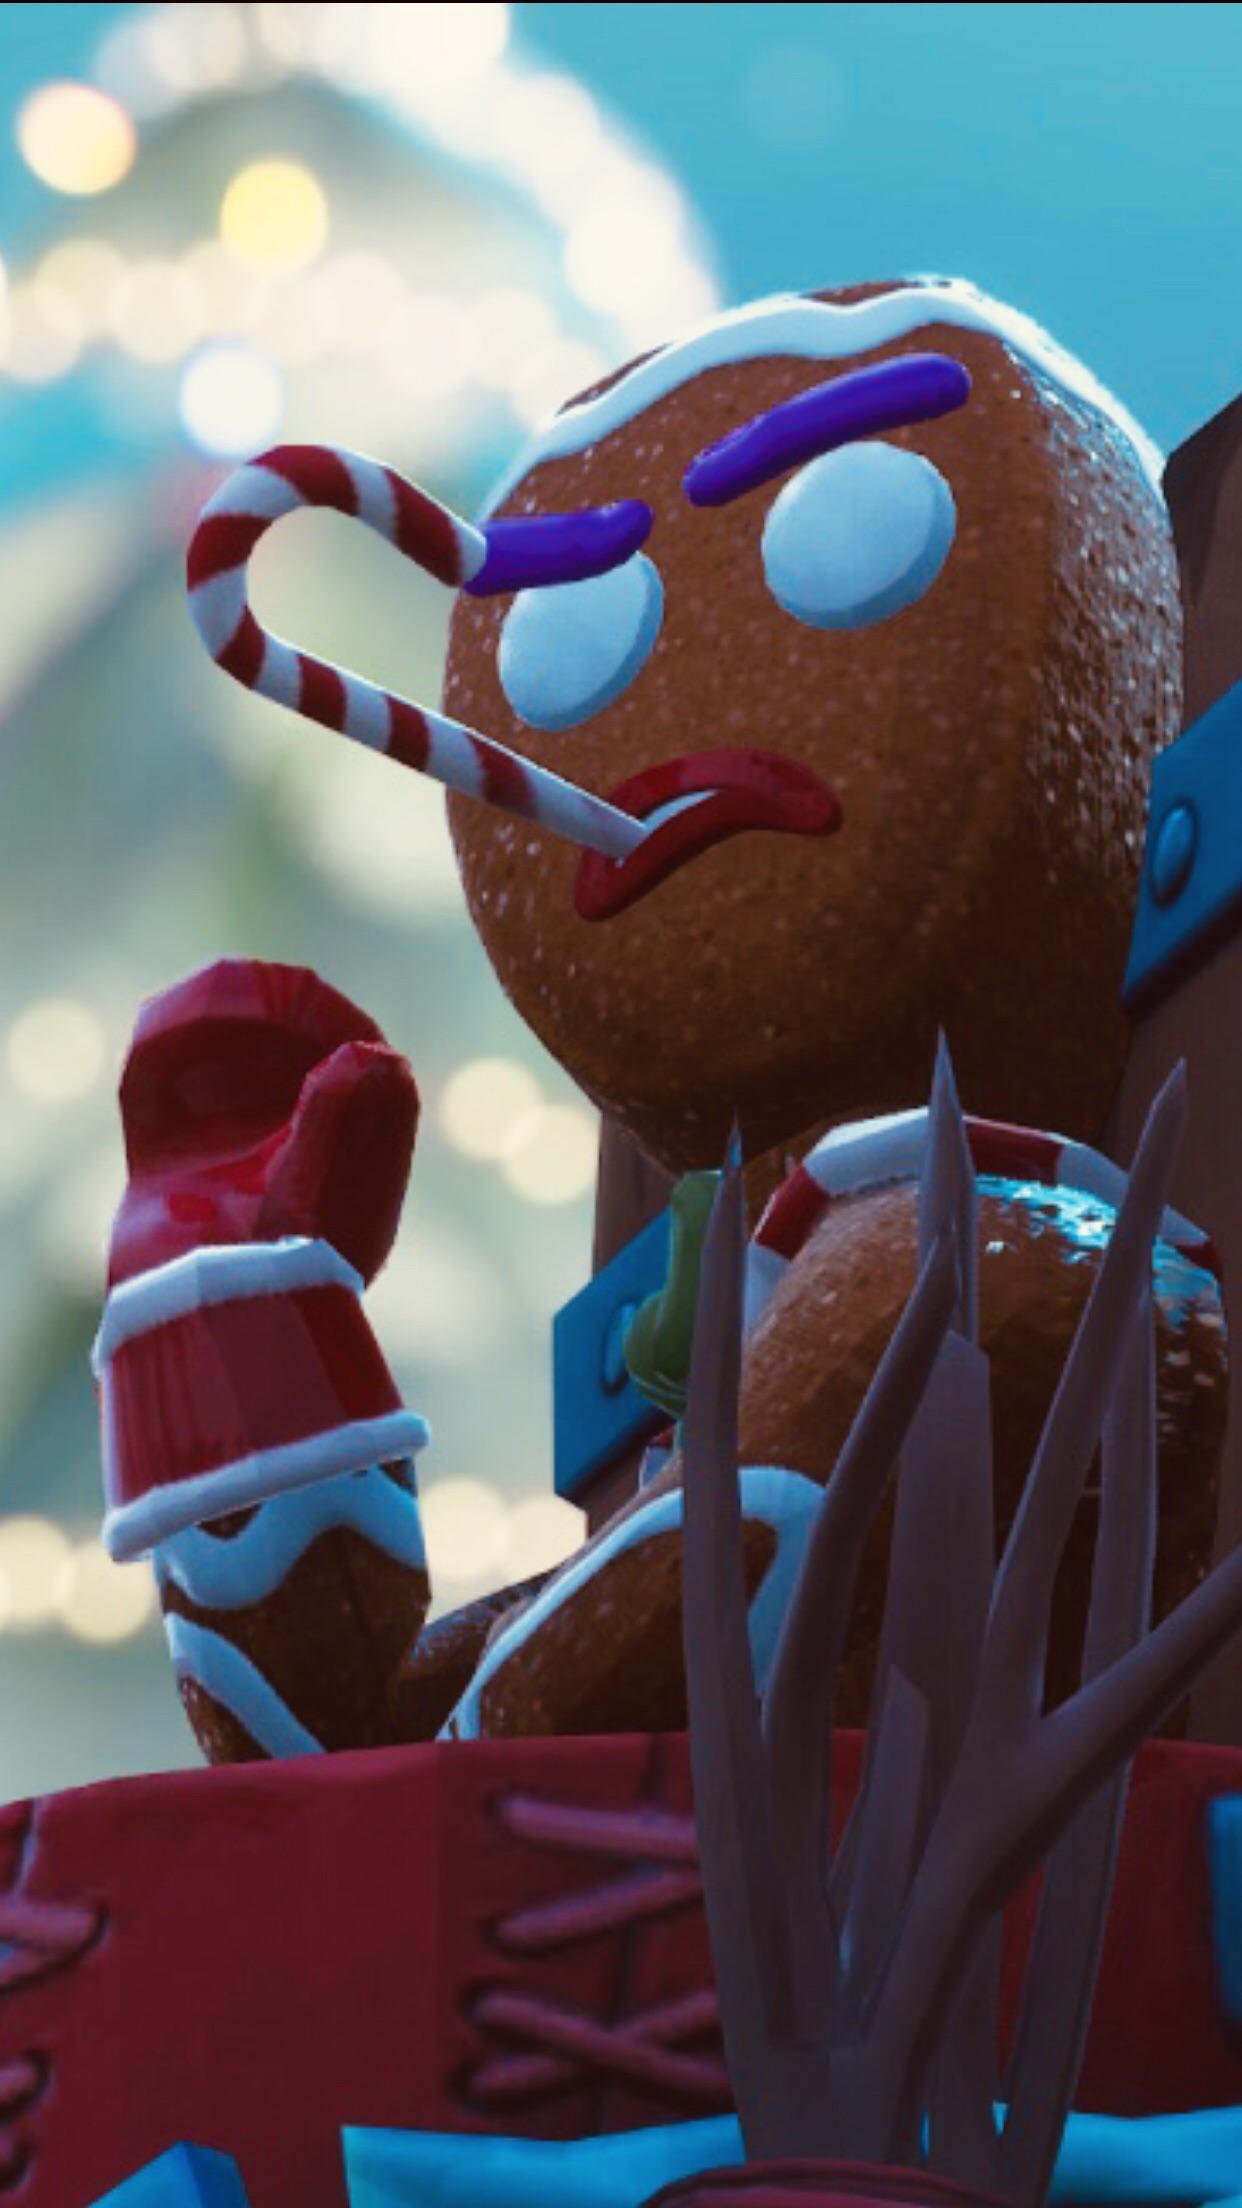 The Gingerbread Pet Is My Favorite Cosmetic They Have Added